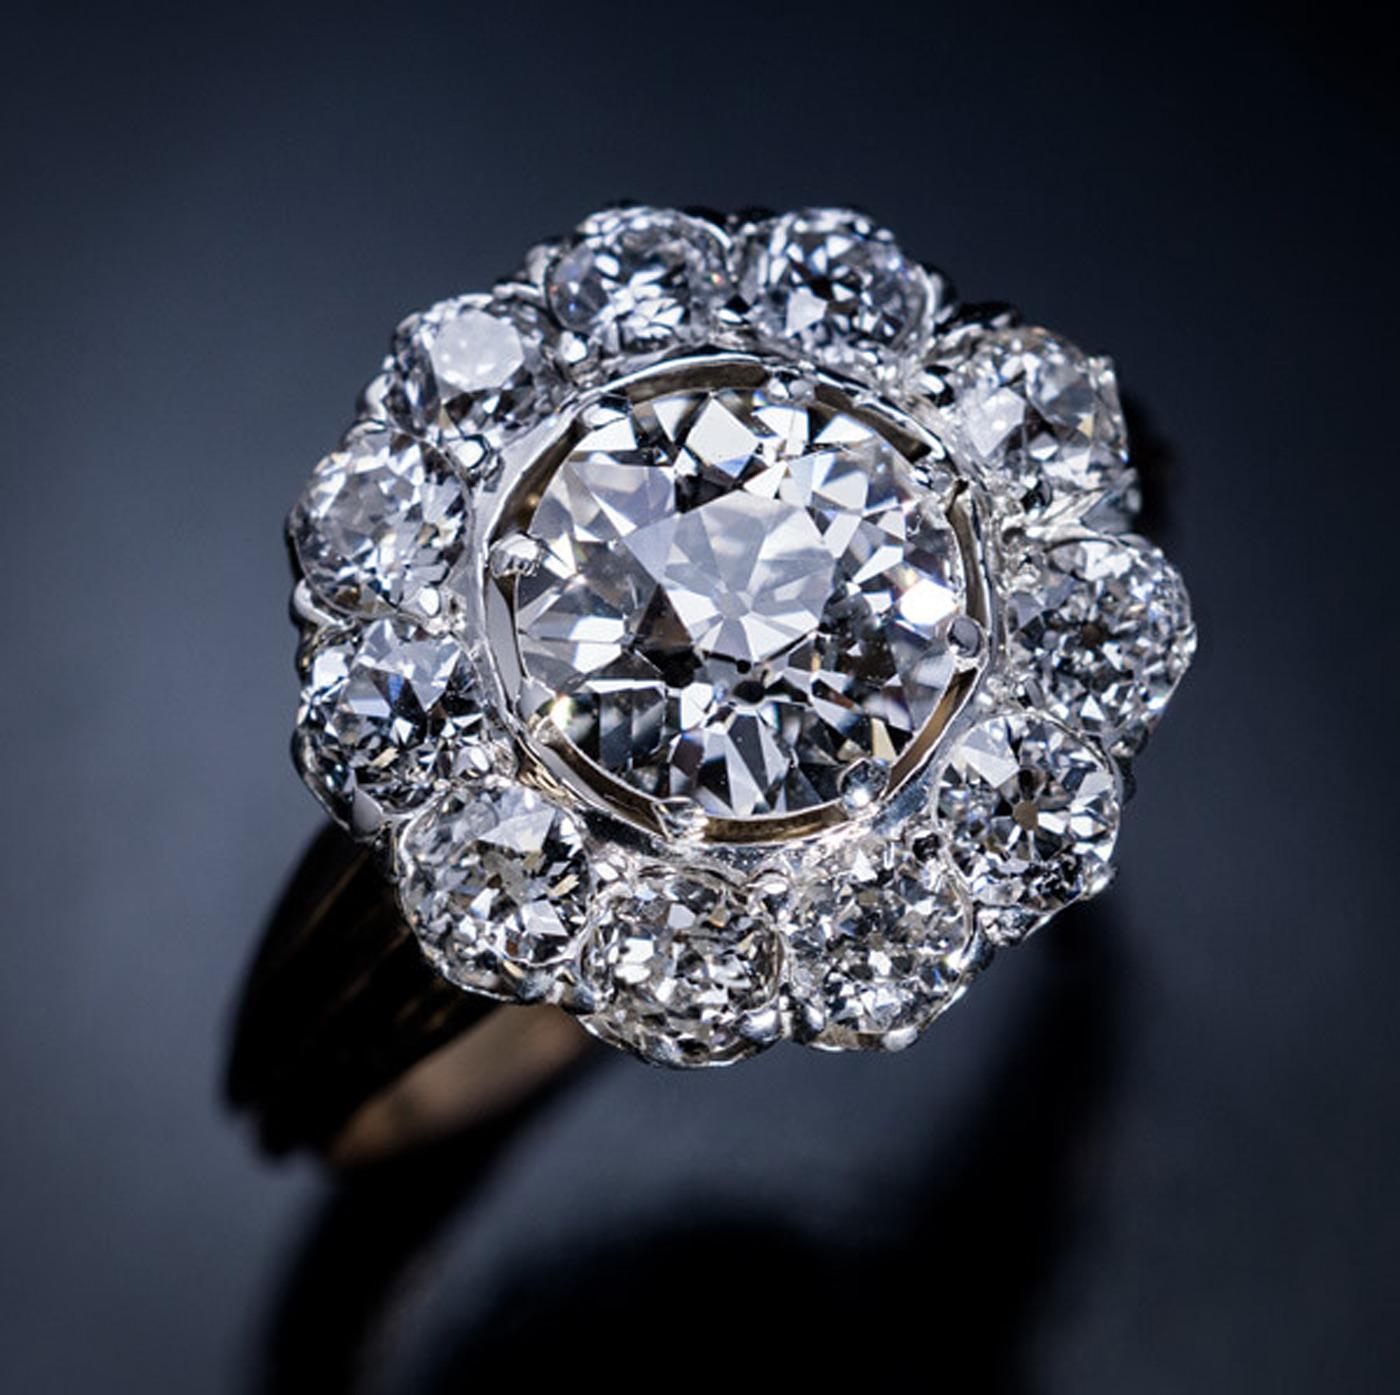 Made in Moscow in the 1880s.

This classic antique diamond cluster ring features a sparkling 1.60 ct old European cut diamond (J color, VS1 clarity). The center stone is encircled by eleven chunky old cut diamonds (G-H color, VS2-SI1 clarity) set in